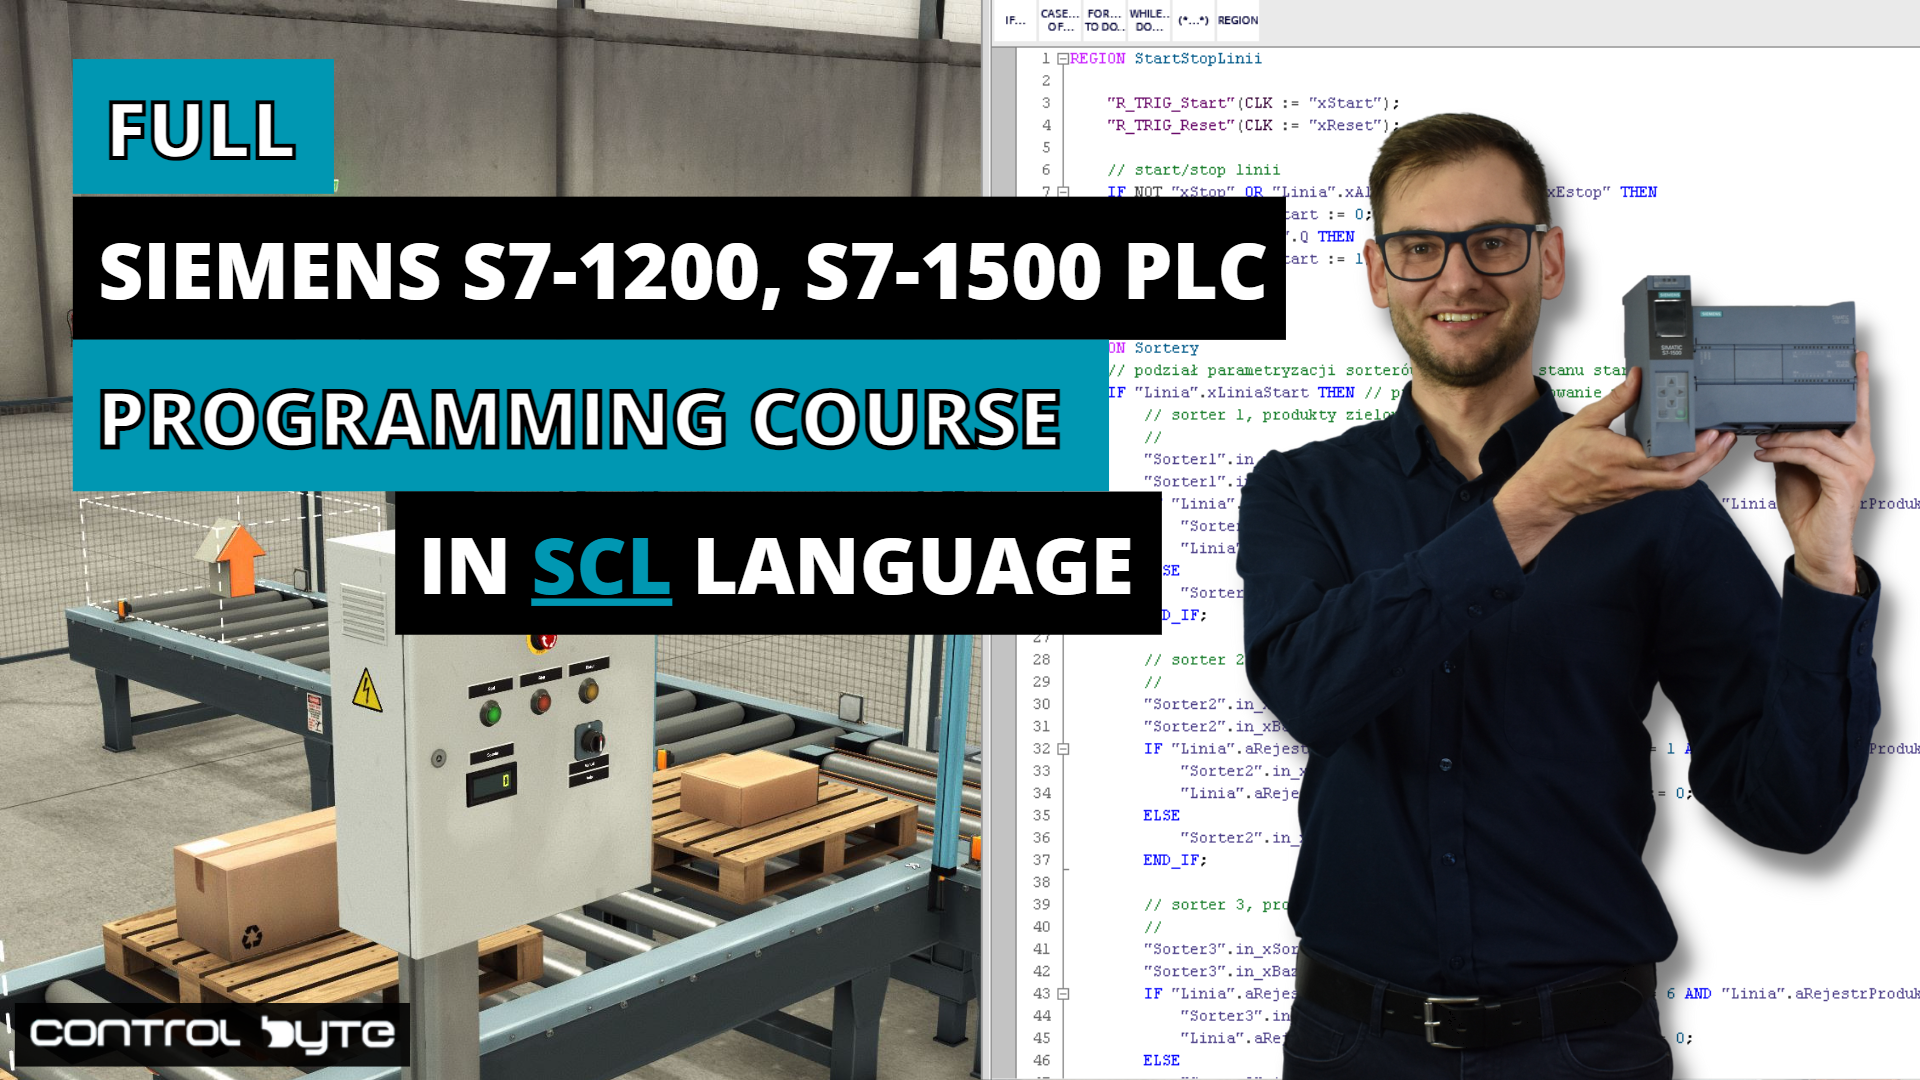 Full Siemens S7-1200, S7-1500 PLC Programming Course in SCL language